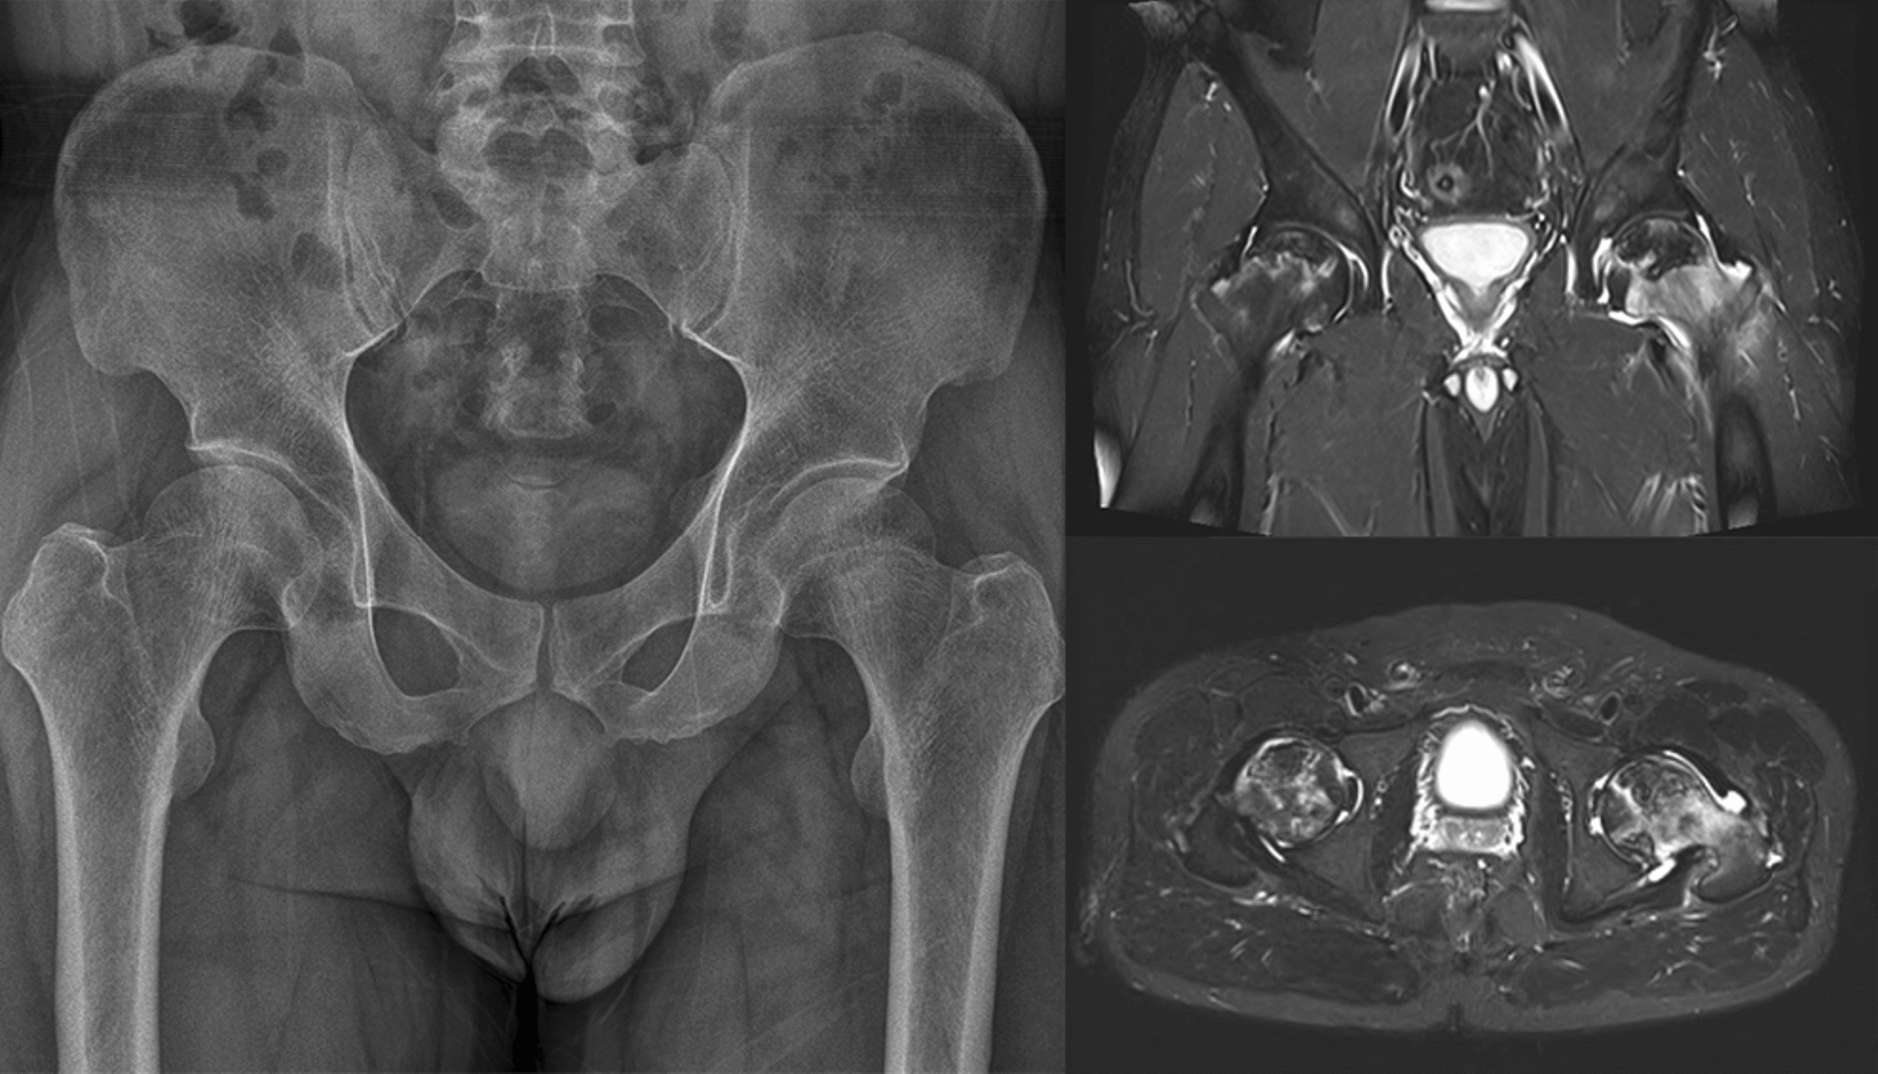 A Very Rare Form of Ceramic Head Fracture in Bipolar Hemiarthroplasty and Total Hip Arthroplasty: Unique Experience and Literature Review